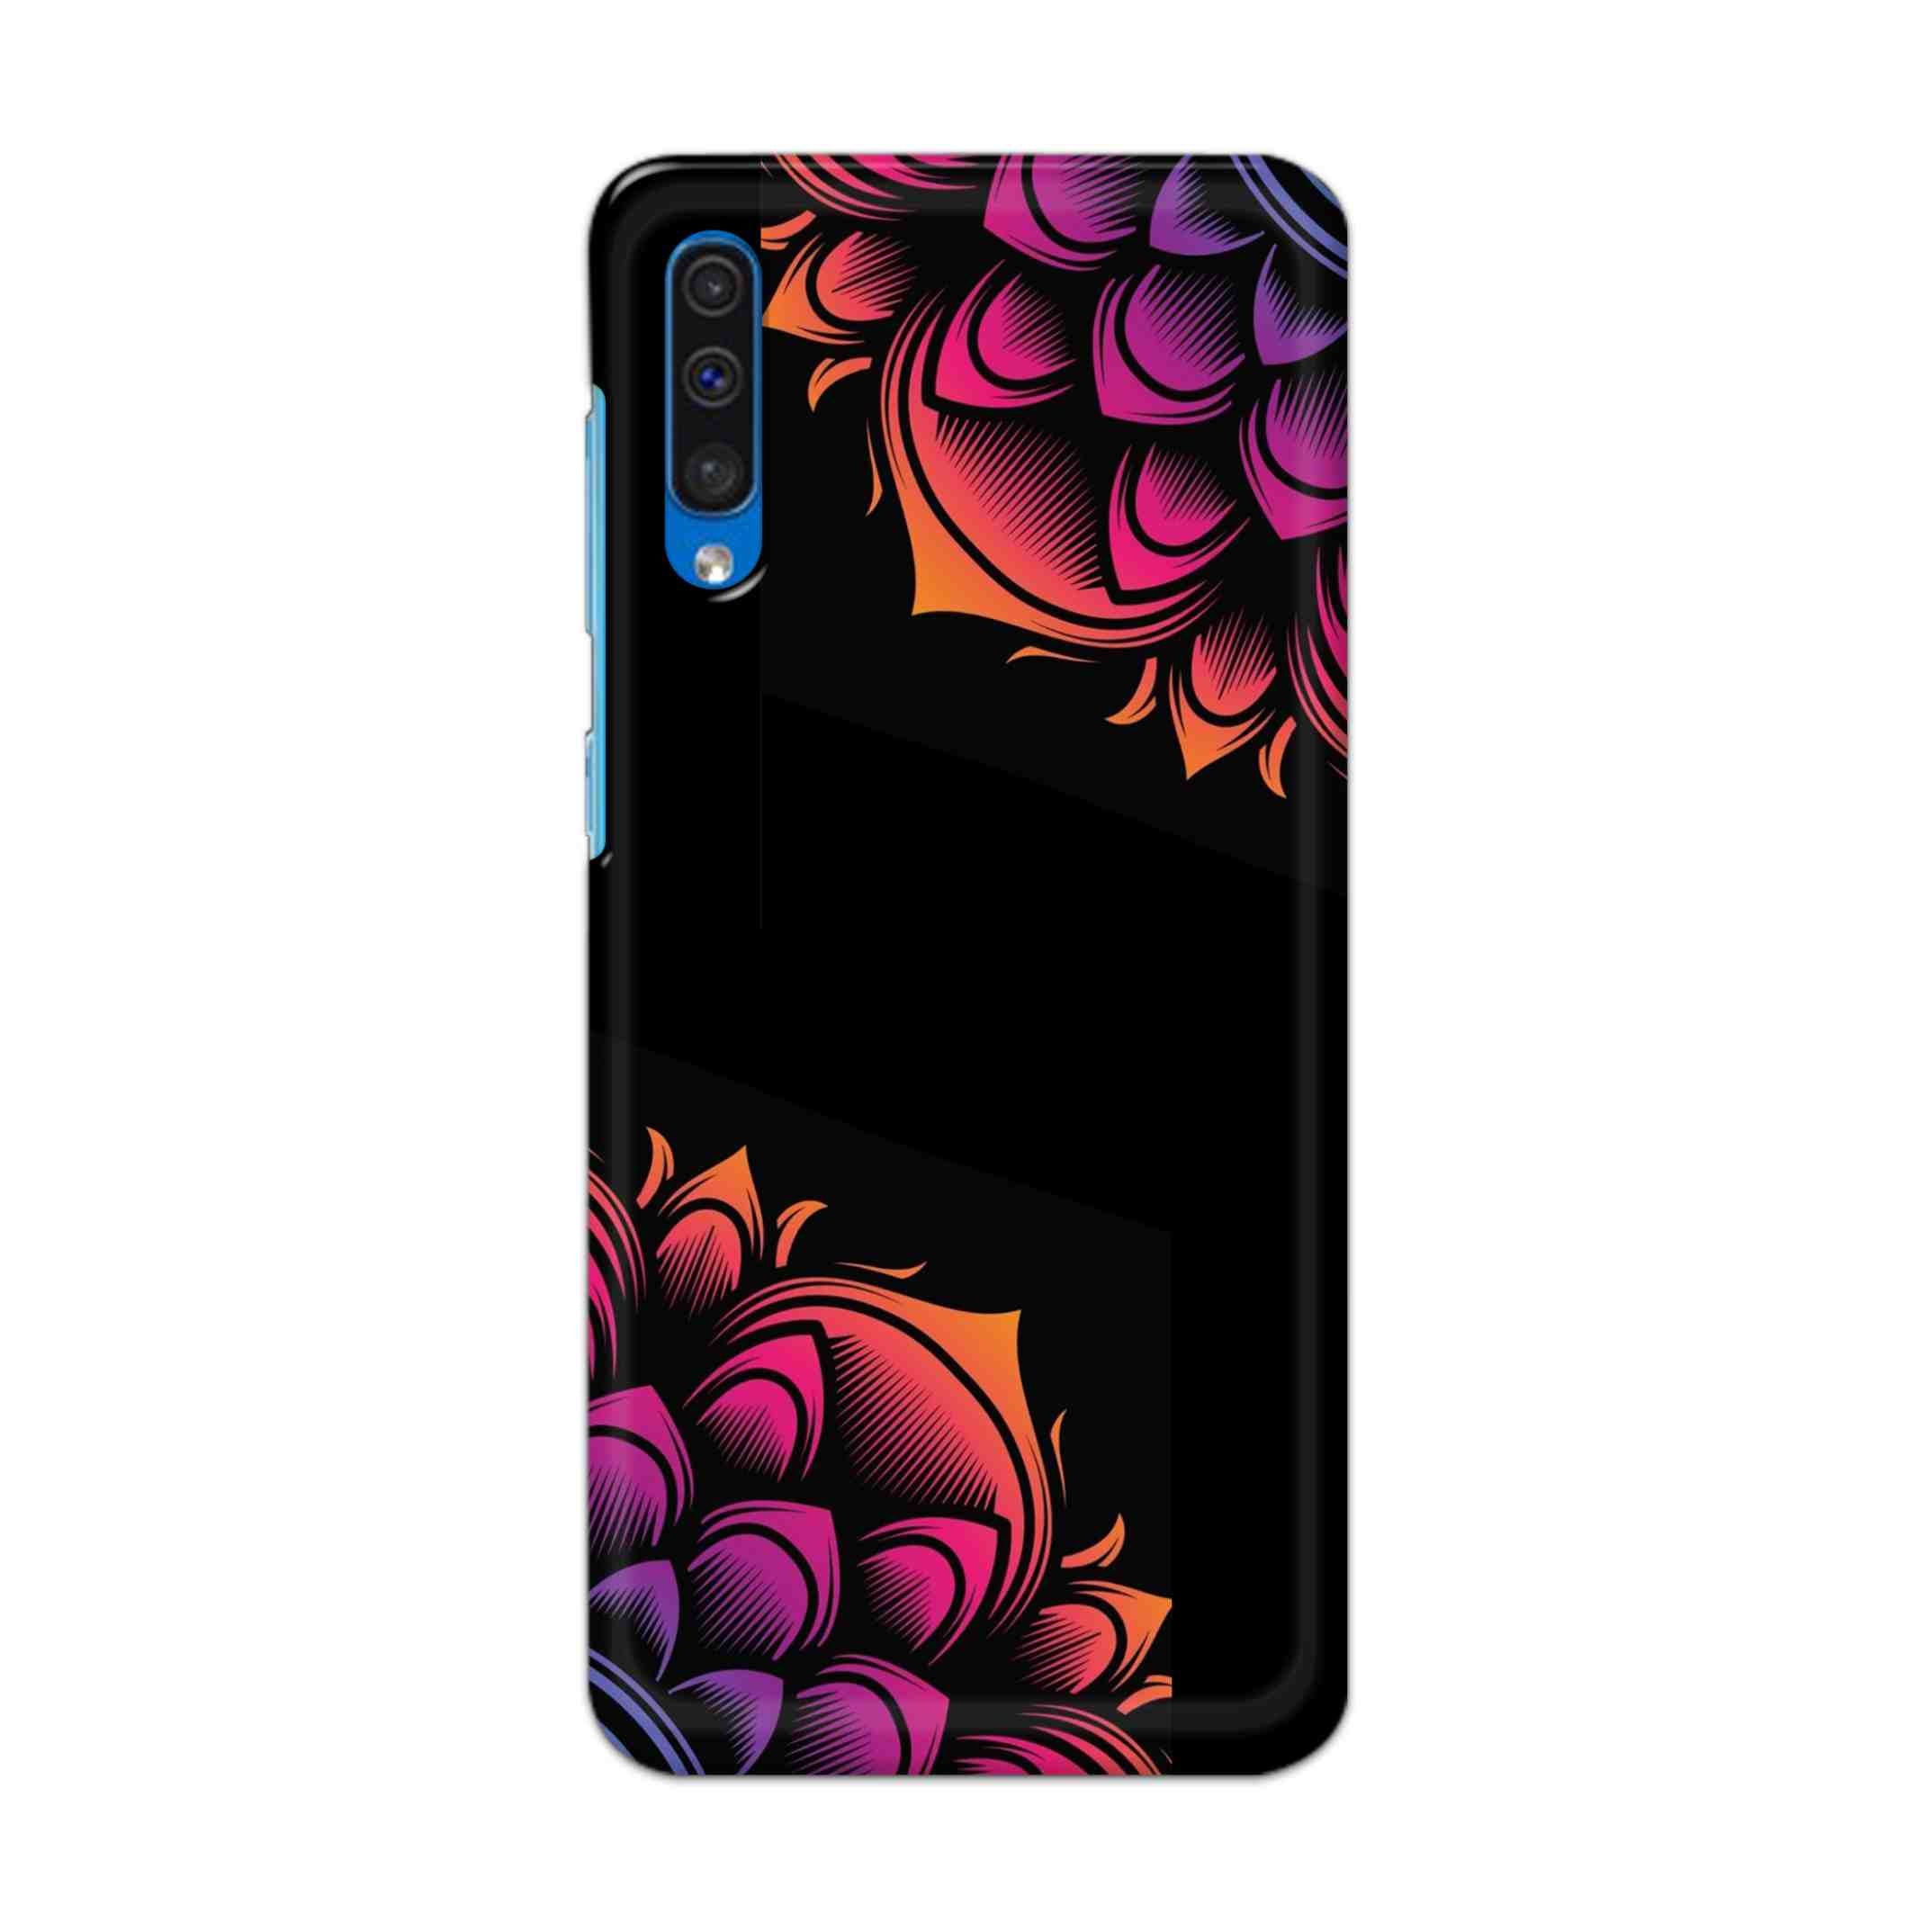 Buy Mandala Hard Back Mobile Phone Case Cover For Samsung Galaxy A50 / A50s / A30s Online